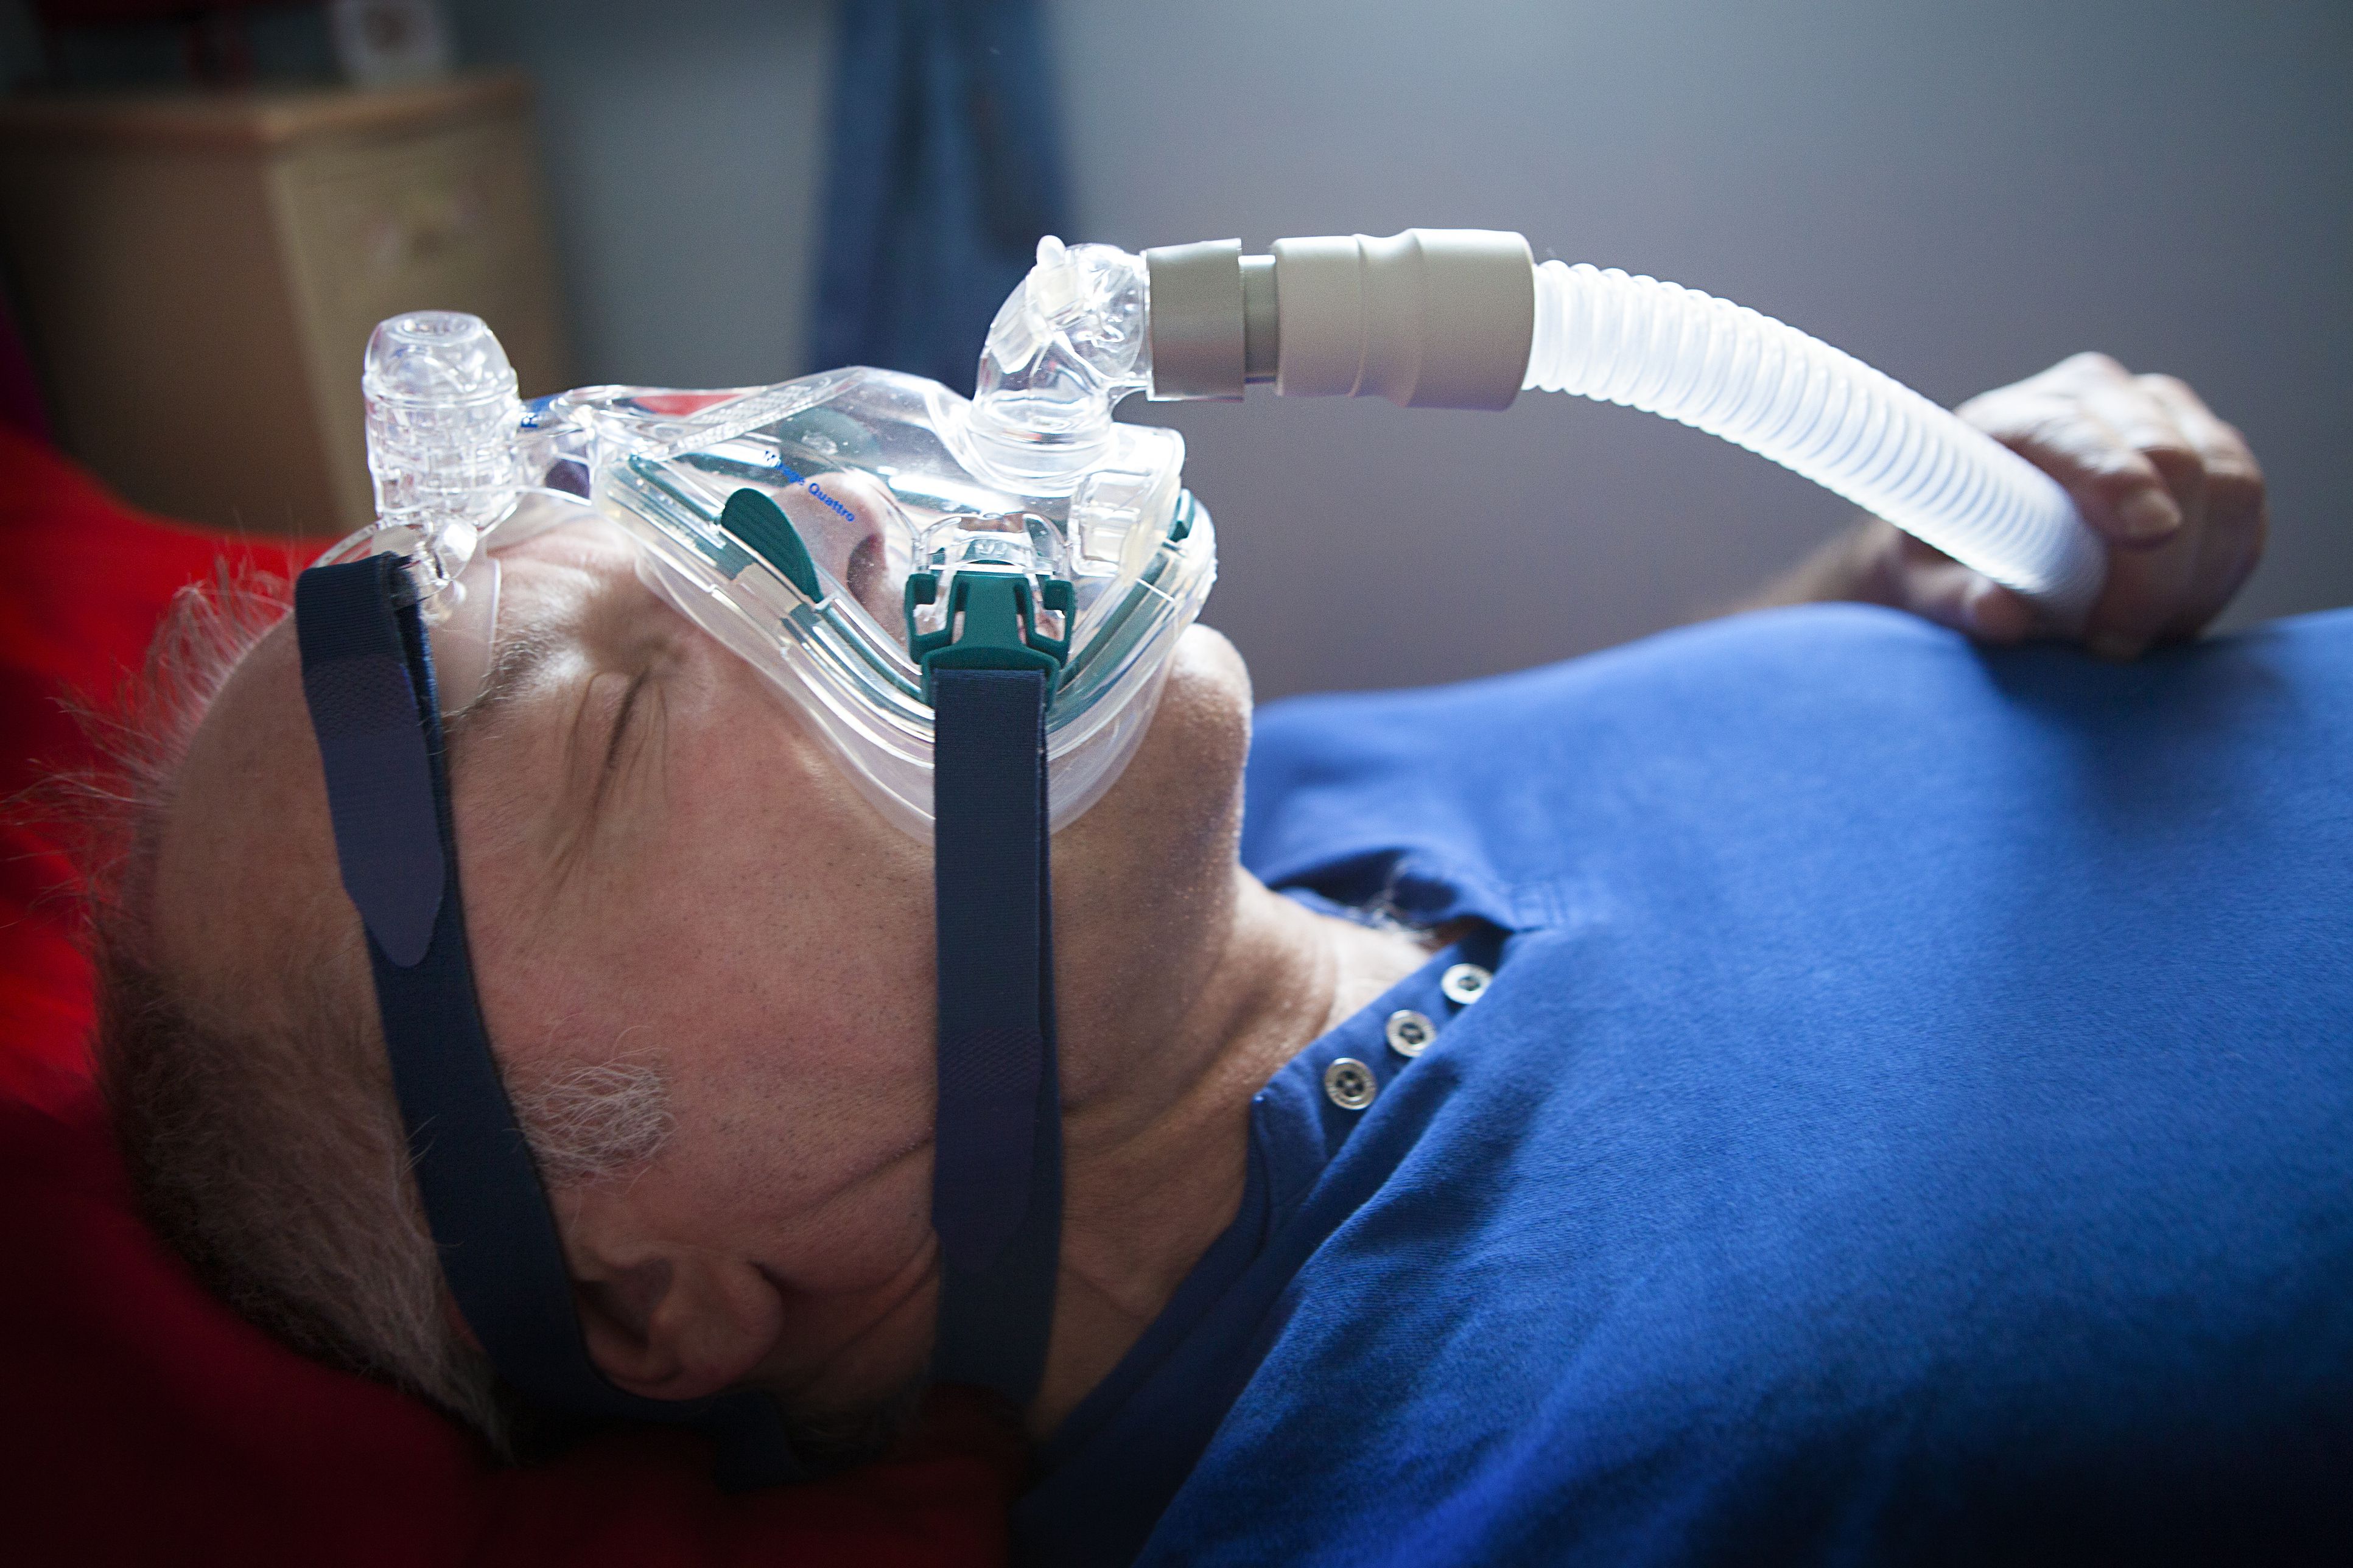 How much do Resmed CPAP/BiPAP machines cost in India?